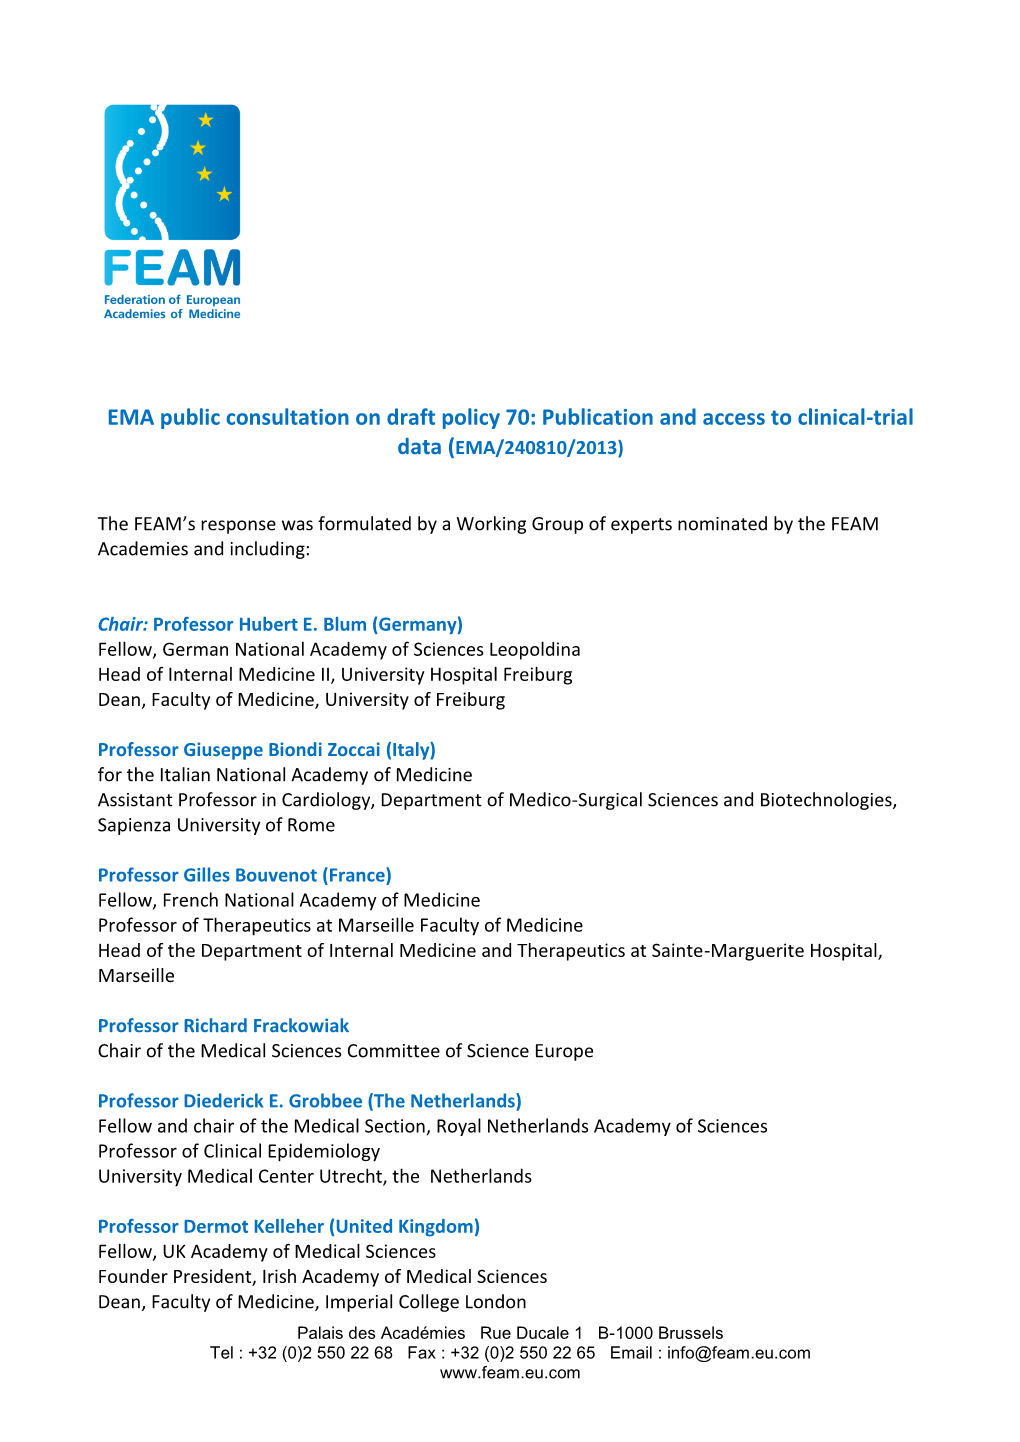 EMA Public Consultation on Draft Policy 70: Publication and Access to Clinical-Trial Data (EMA/240810/2013)